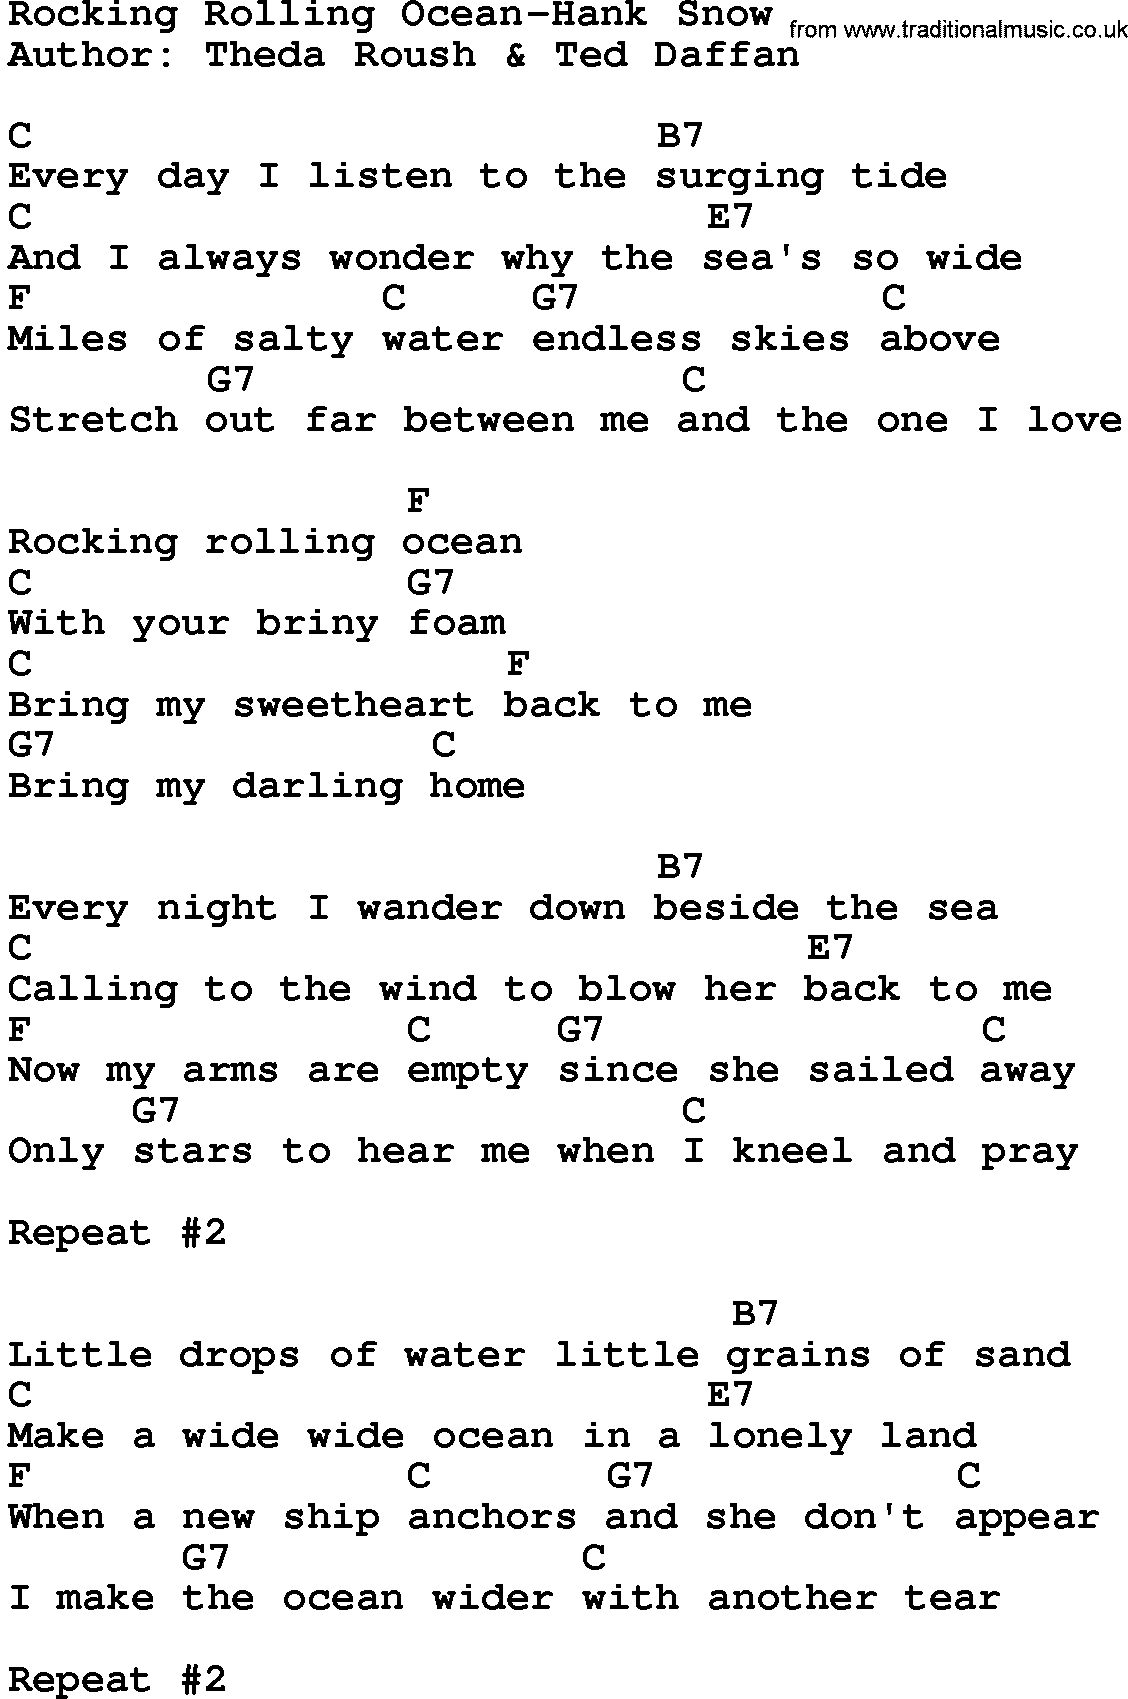 Country music song: Rocking Rolling Ocean-Hank Snow lyrics and chords